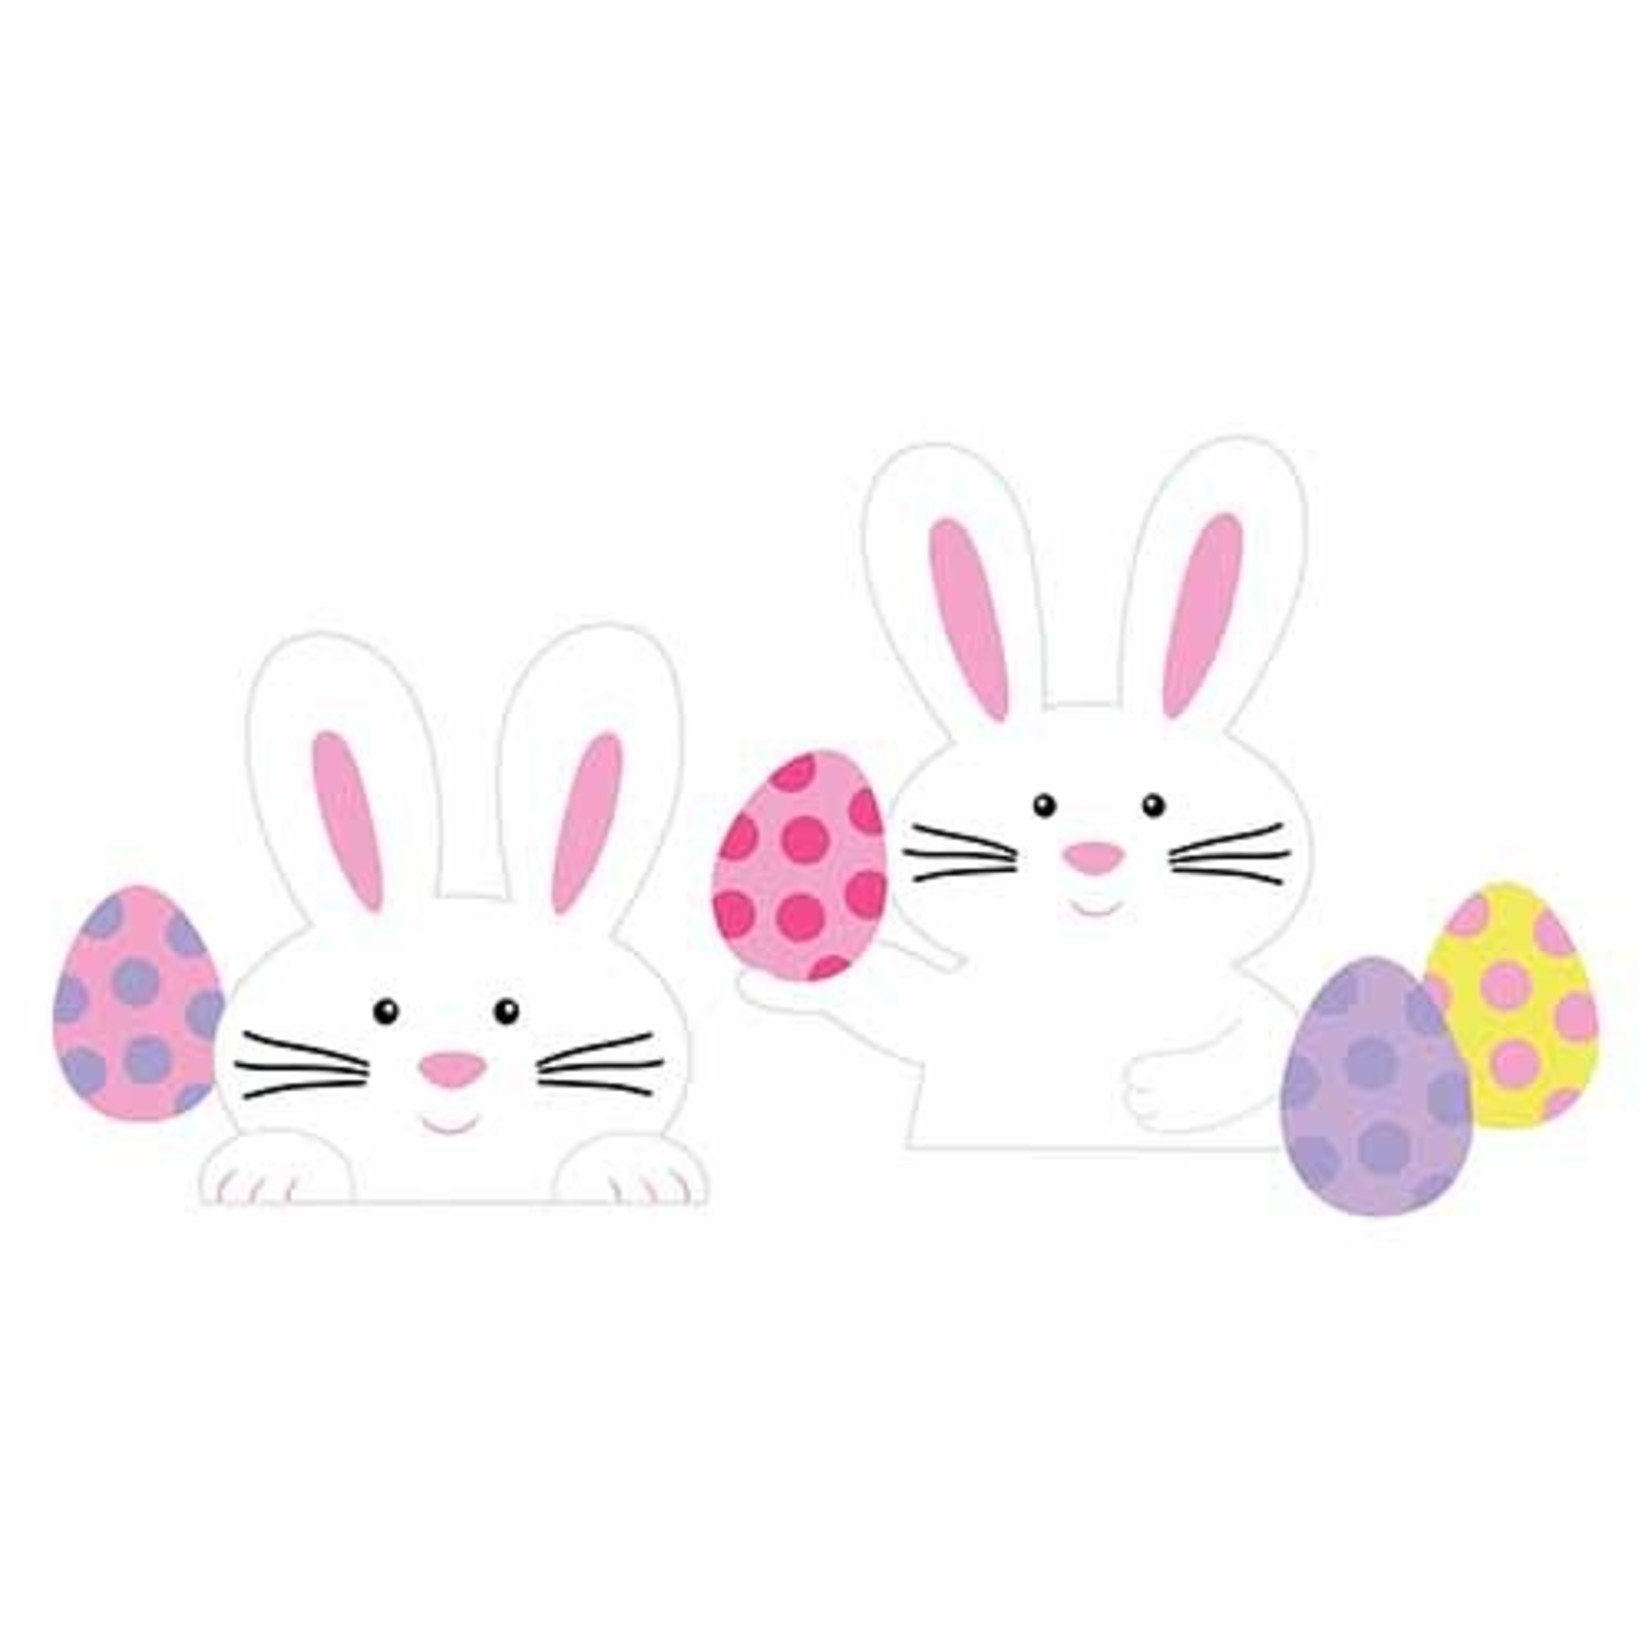 Amscan Easter Bunny Yard Signs - 5ct.